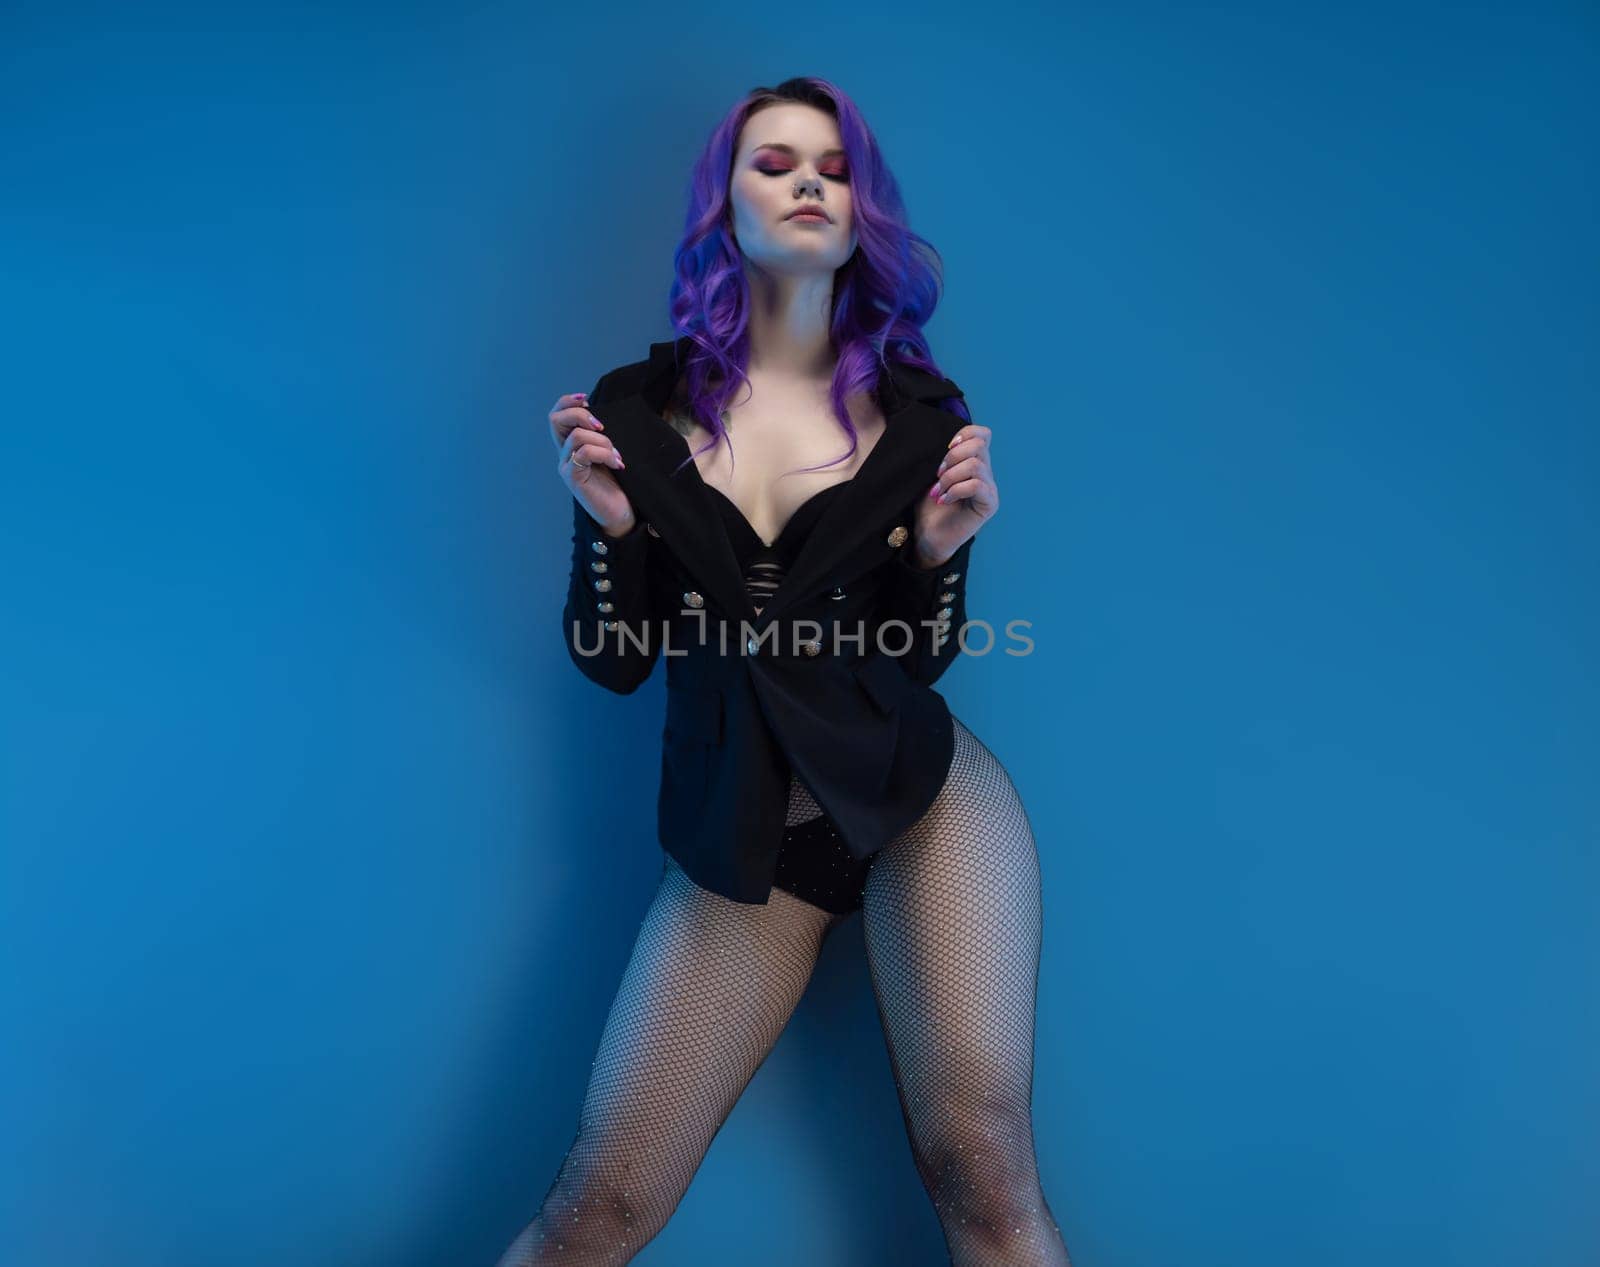 sexy girl in a fancy jacket and purple hair posing erotically in her underwear against a blue background copy paste by Rotozey